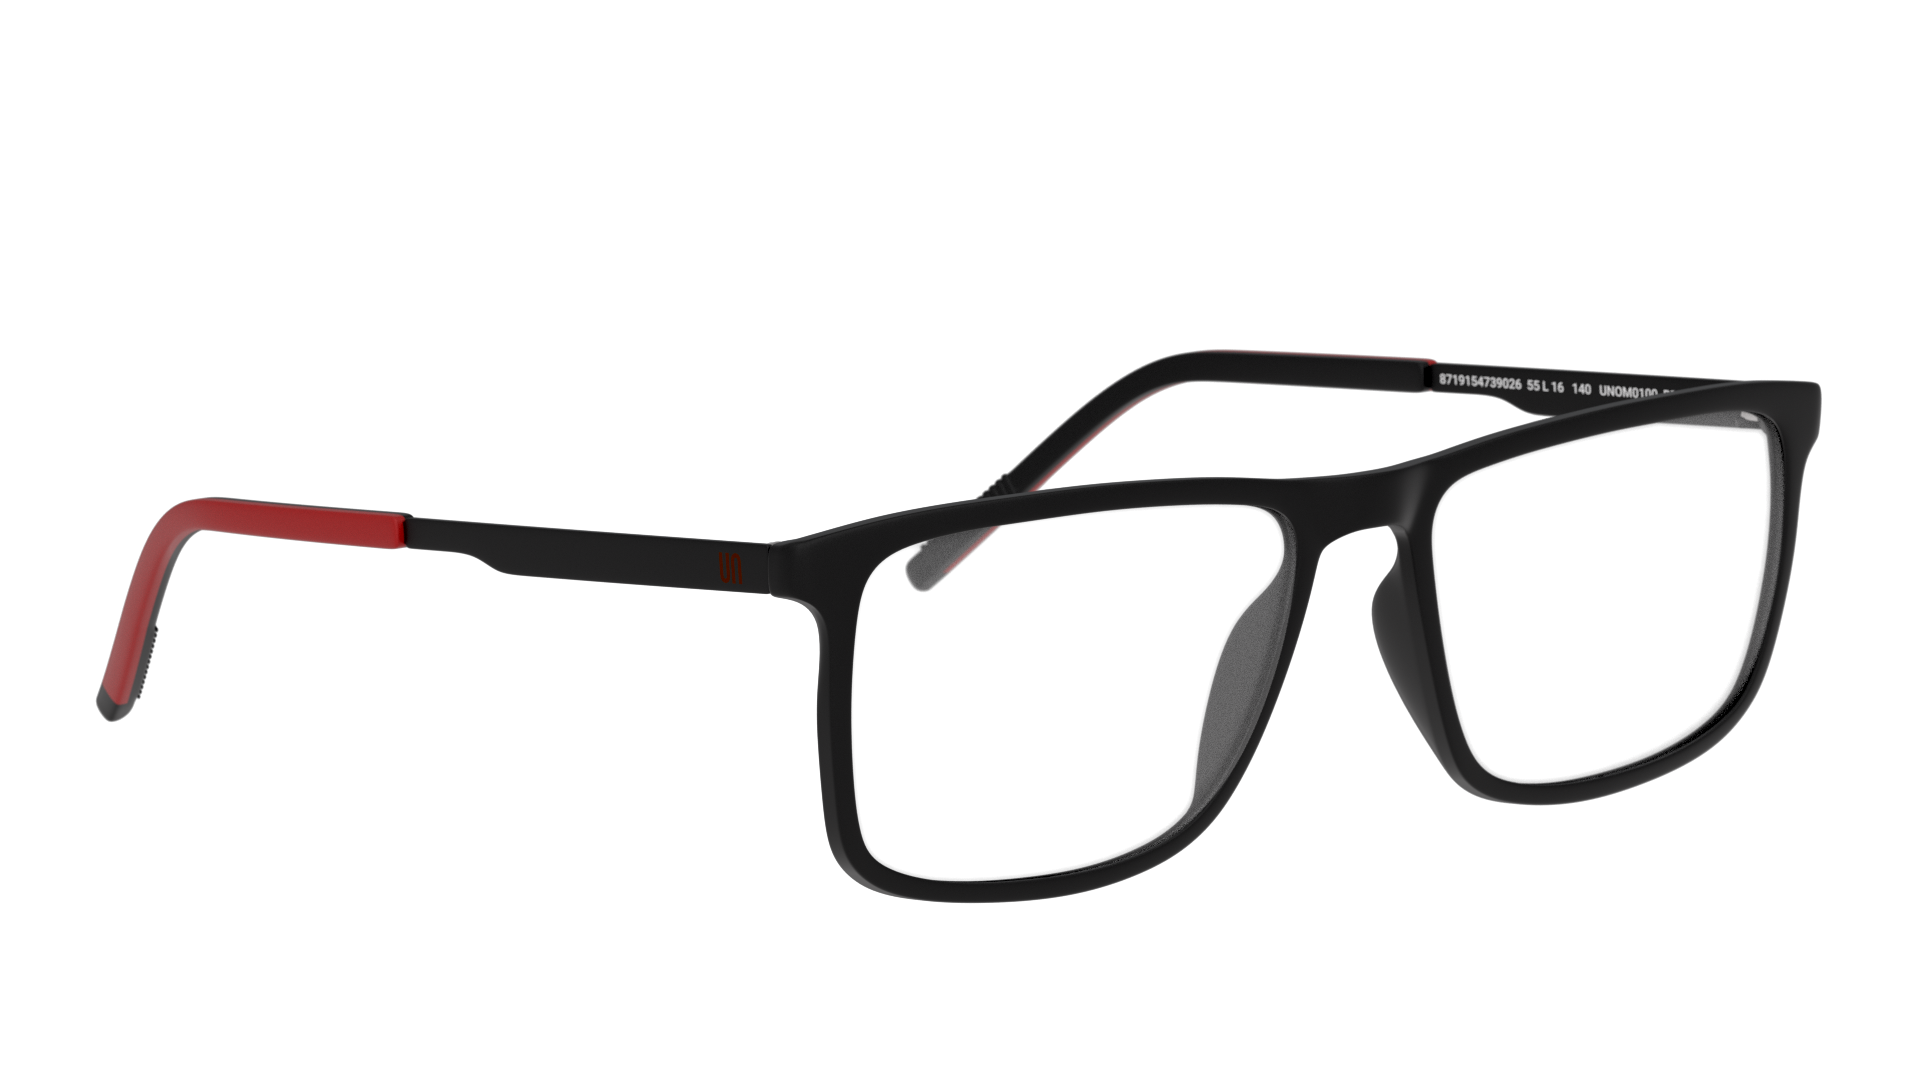 Angle_Right01 Unofficial UN OM0100 (BB00) Glasses Transparent / Black